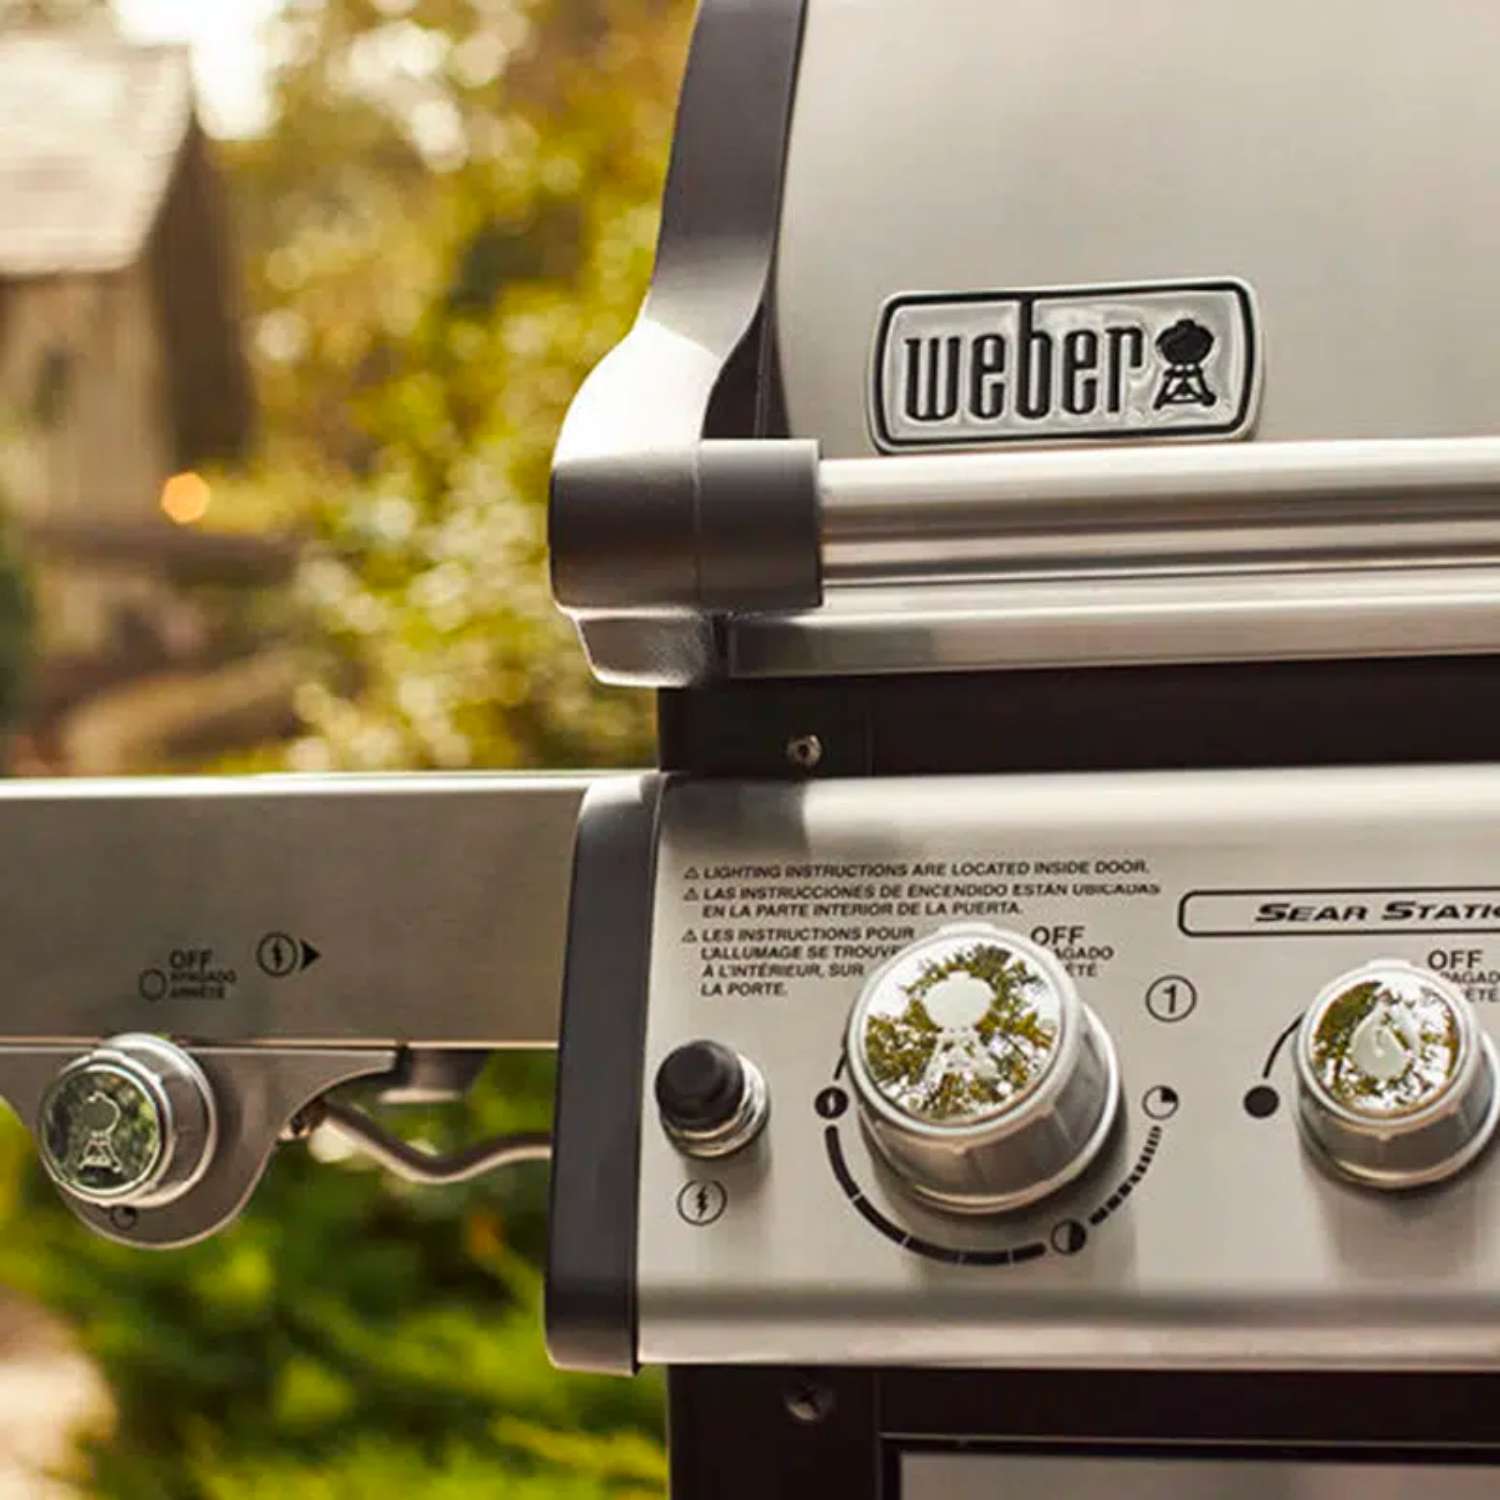 Weber Spirit SP-335 Grill perfect for outdoor barbecues available at MeatKing.hk6